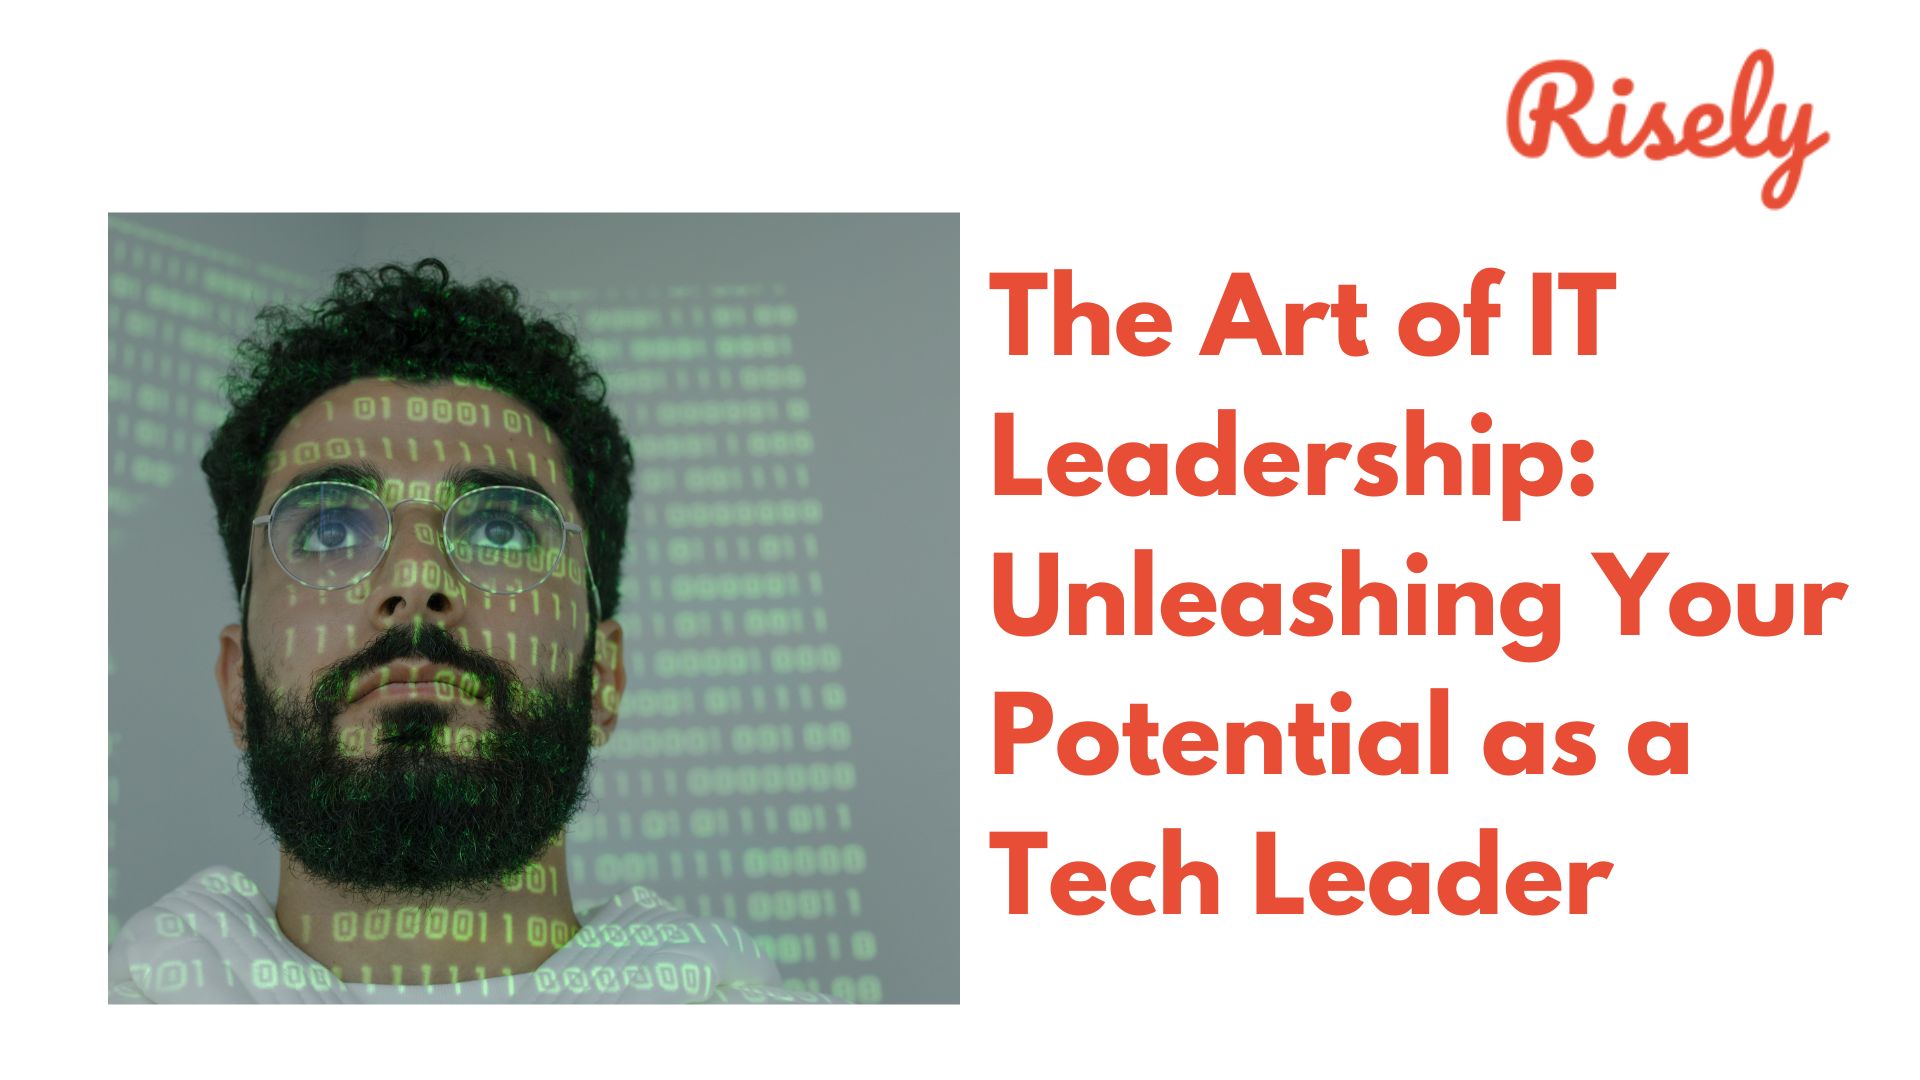 The Art of IT Leadership: Unleashing Your Potential as a Tech Leader